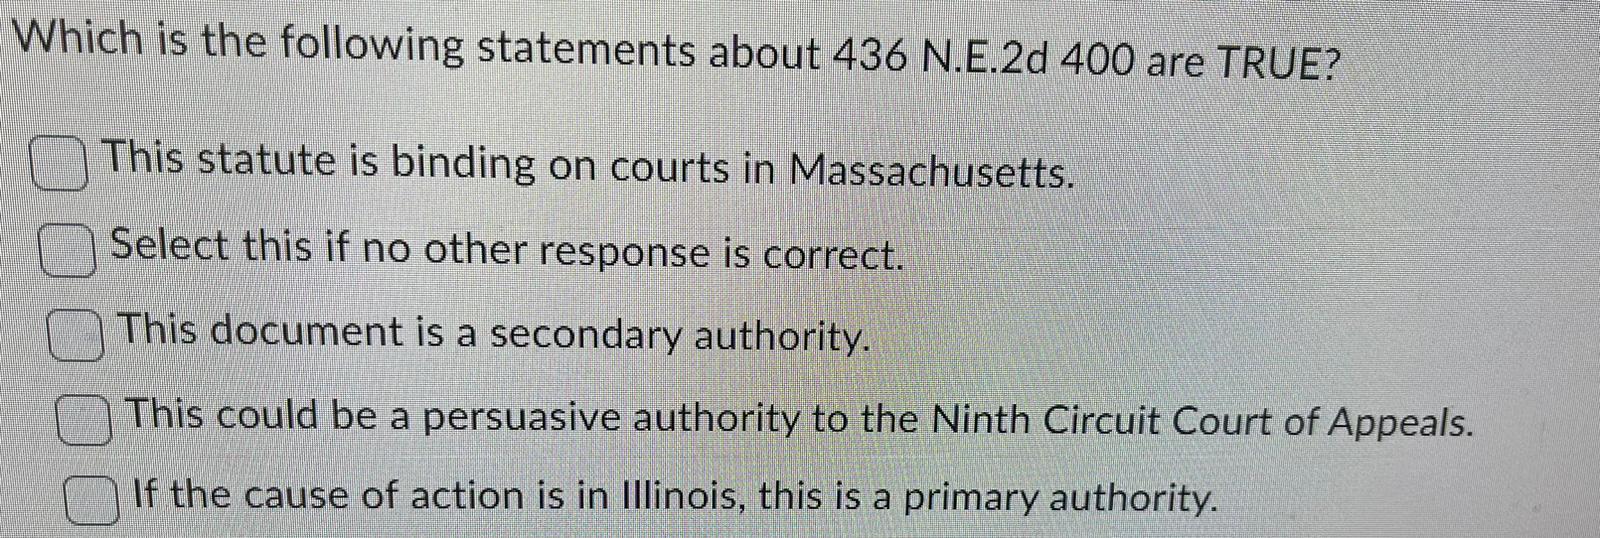 Which is the following statements about 436 N.E.2d 400 are TRUE? This statute is binding on courts in